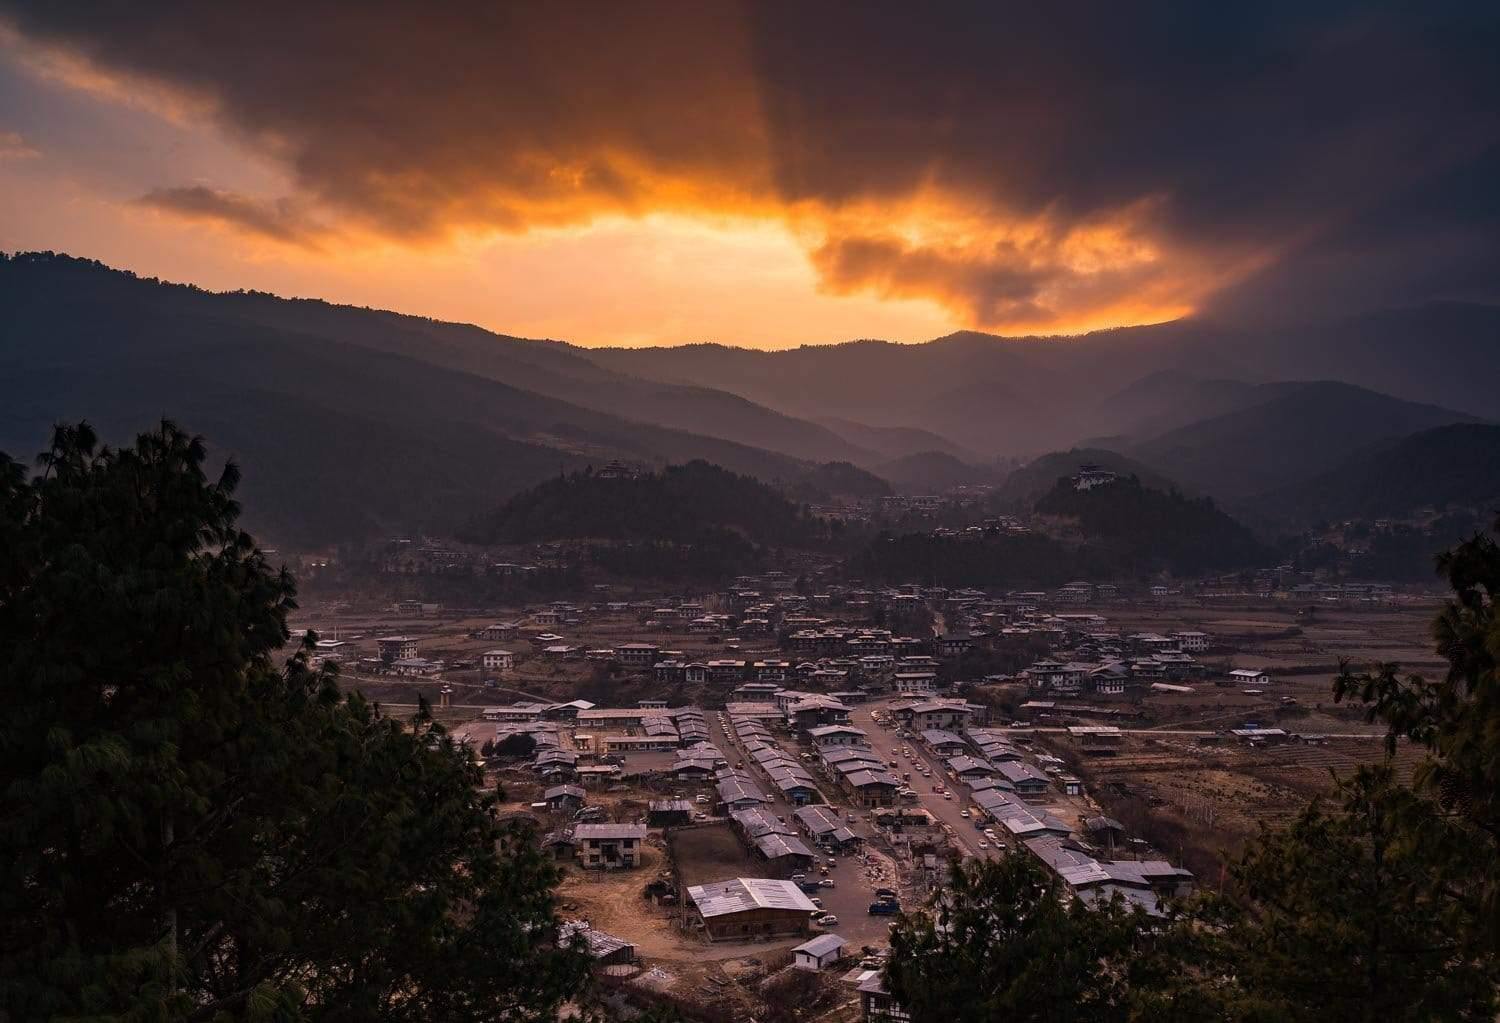 A long-shot view of sunset in a beautiful village surrounded by mountains wall, and the trees windowing the entire scene, Bhutan Sunset